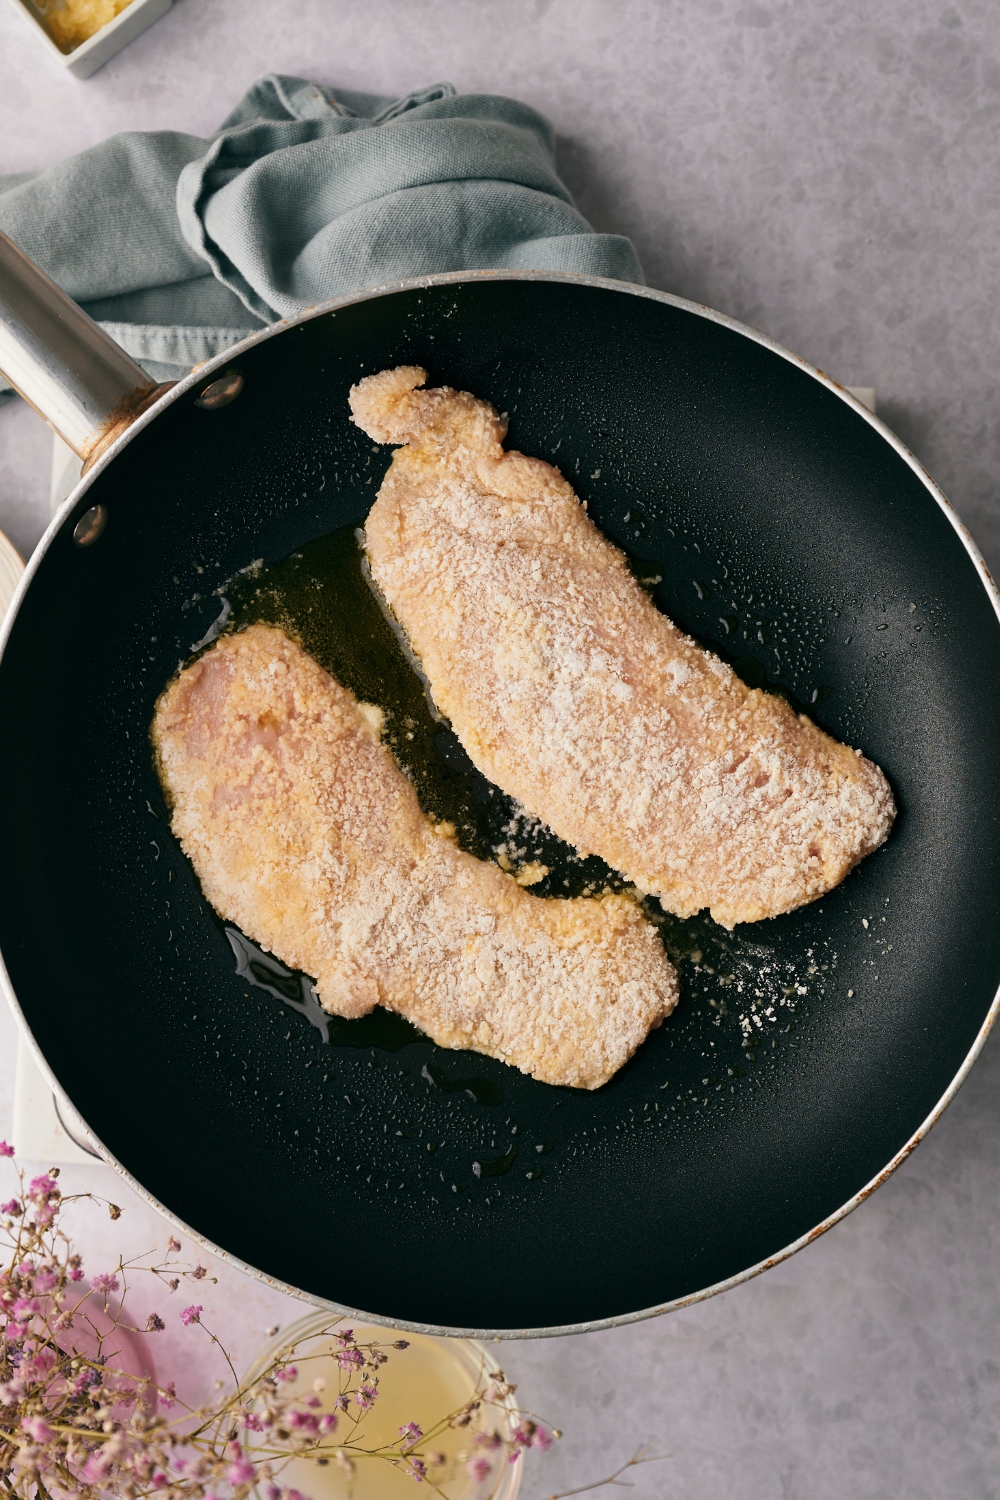 A frying pan with breaded chicken being cooked in hot oil.